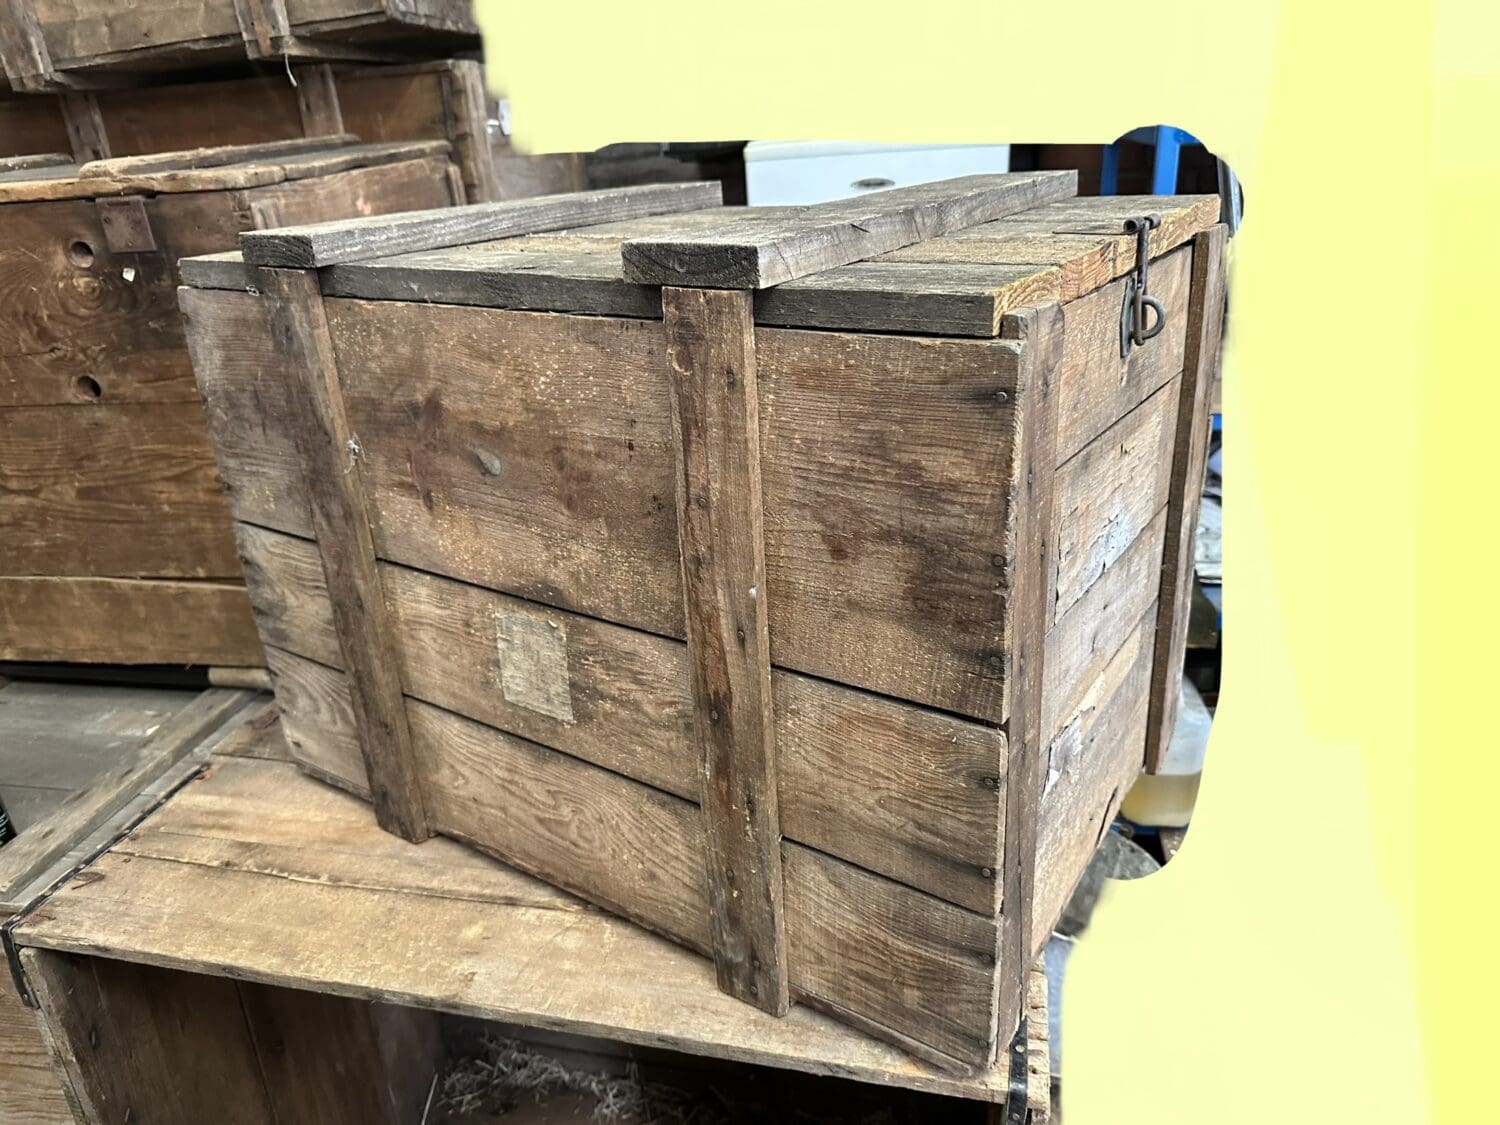 THB9498 packing / shipping crate planked wooden with hinged lid